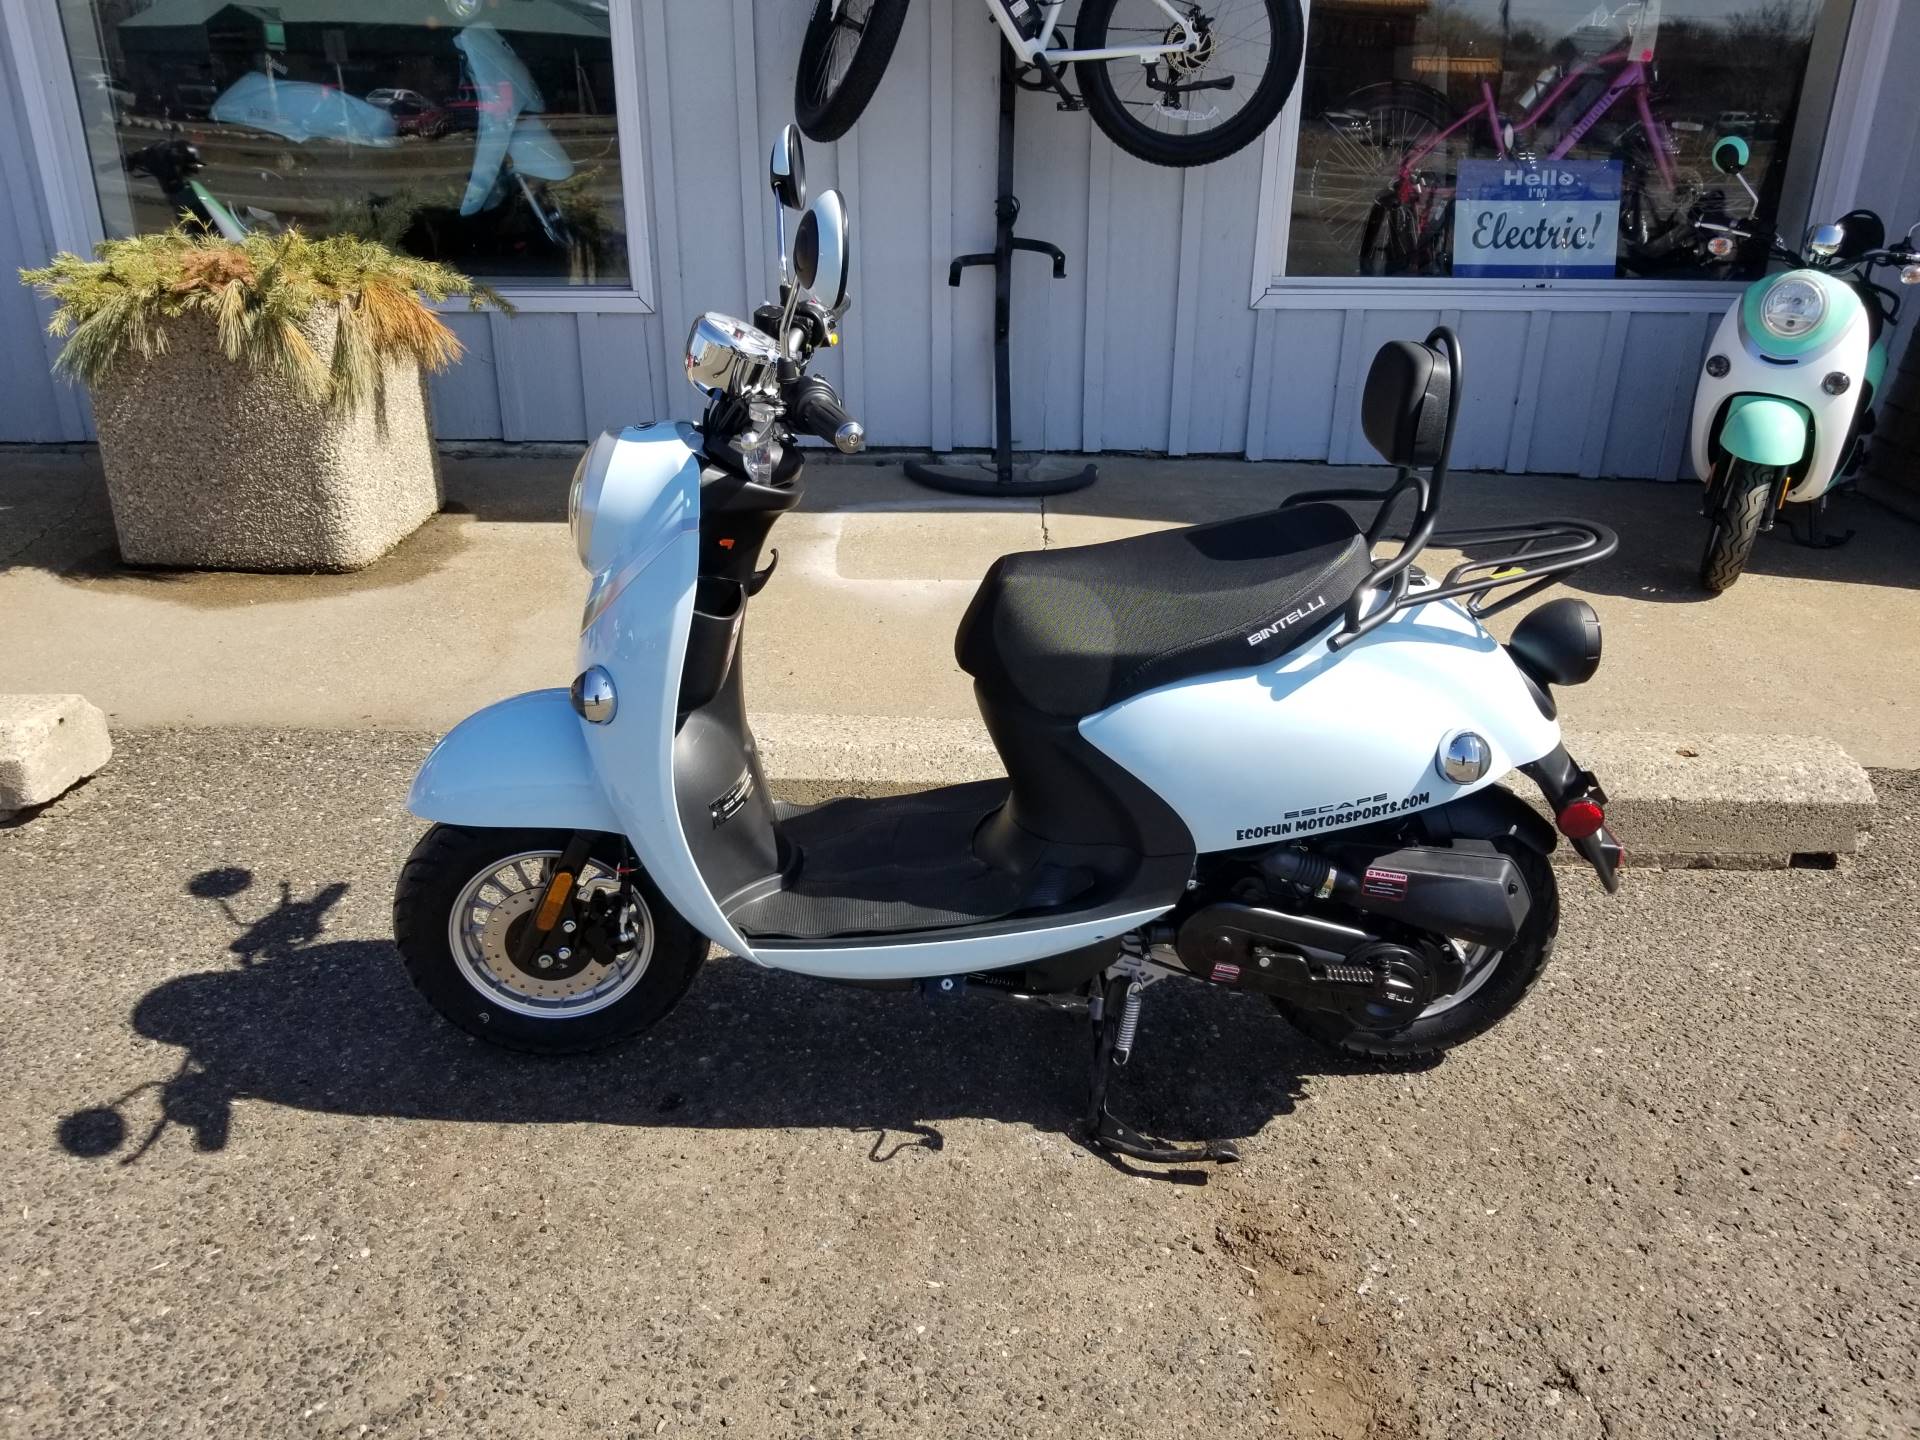 2022 YNGF Escape 49cc Scooter in Forest Lake, Minnesota - Photo 2